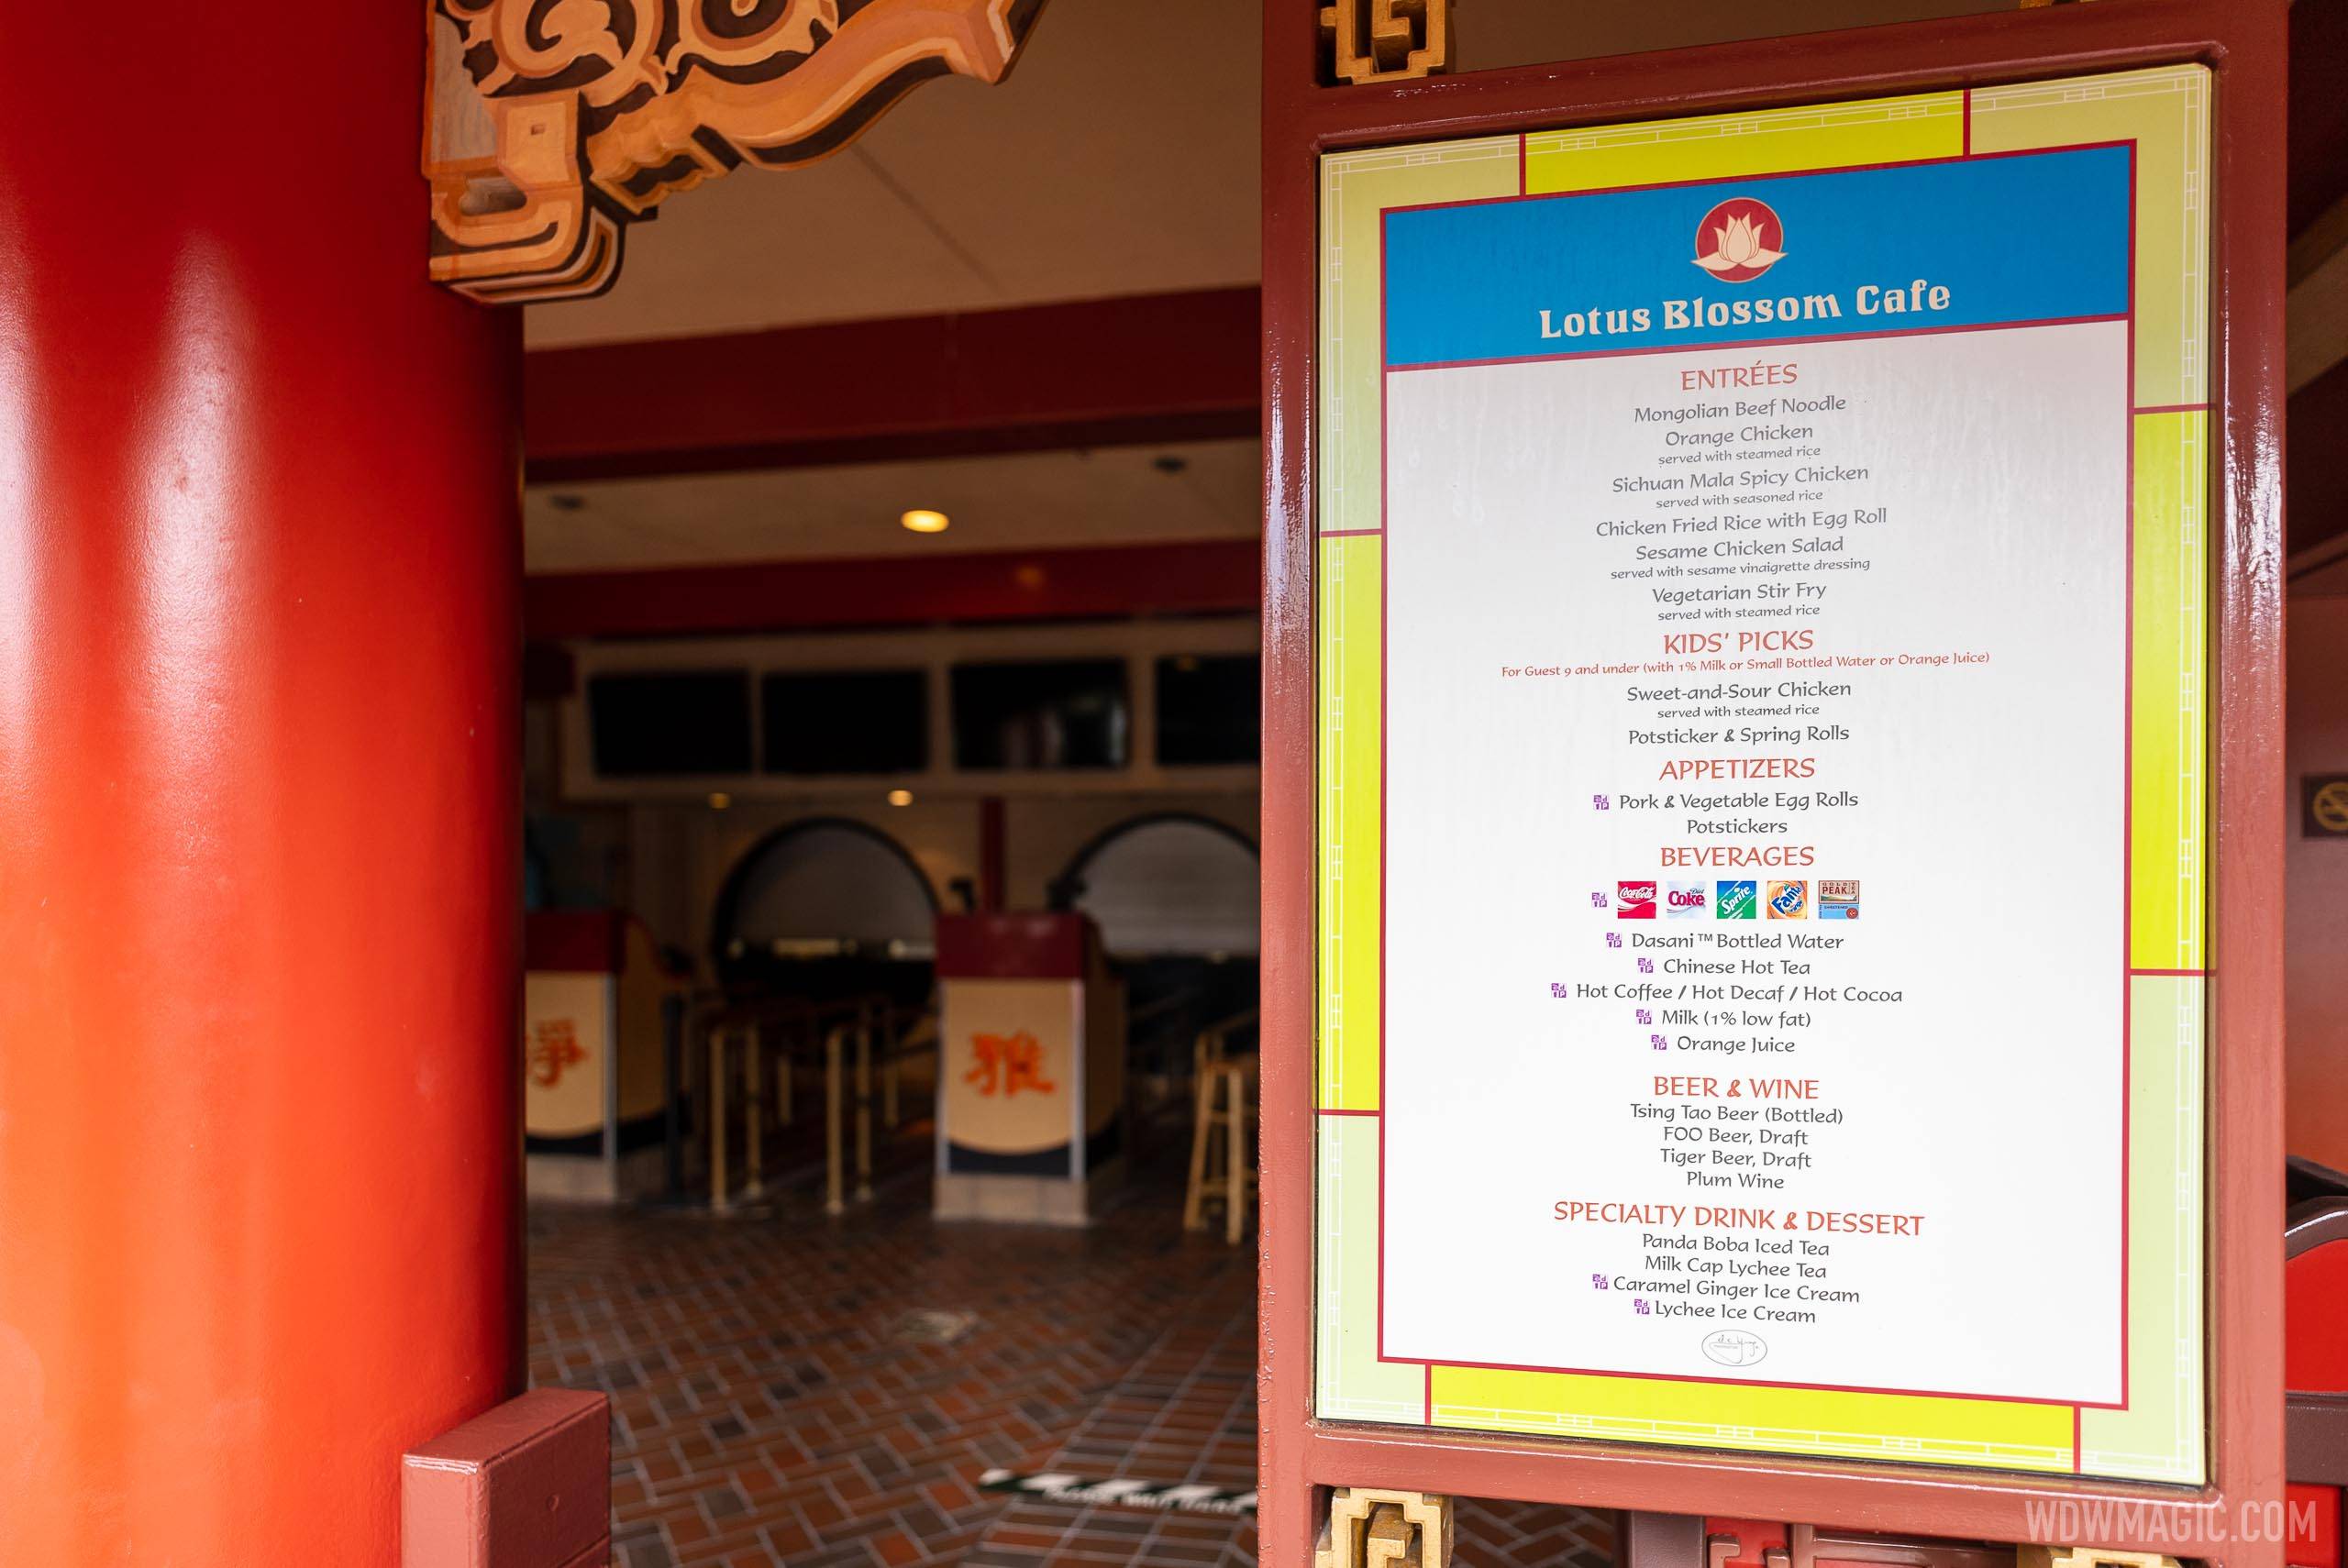 Lotus Blossom Cafe overview